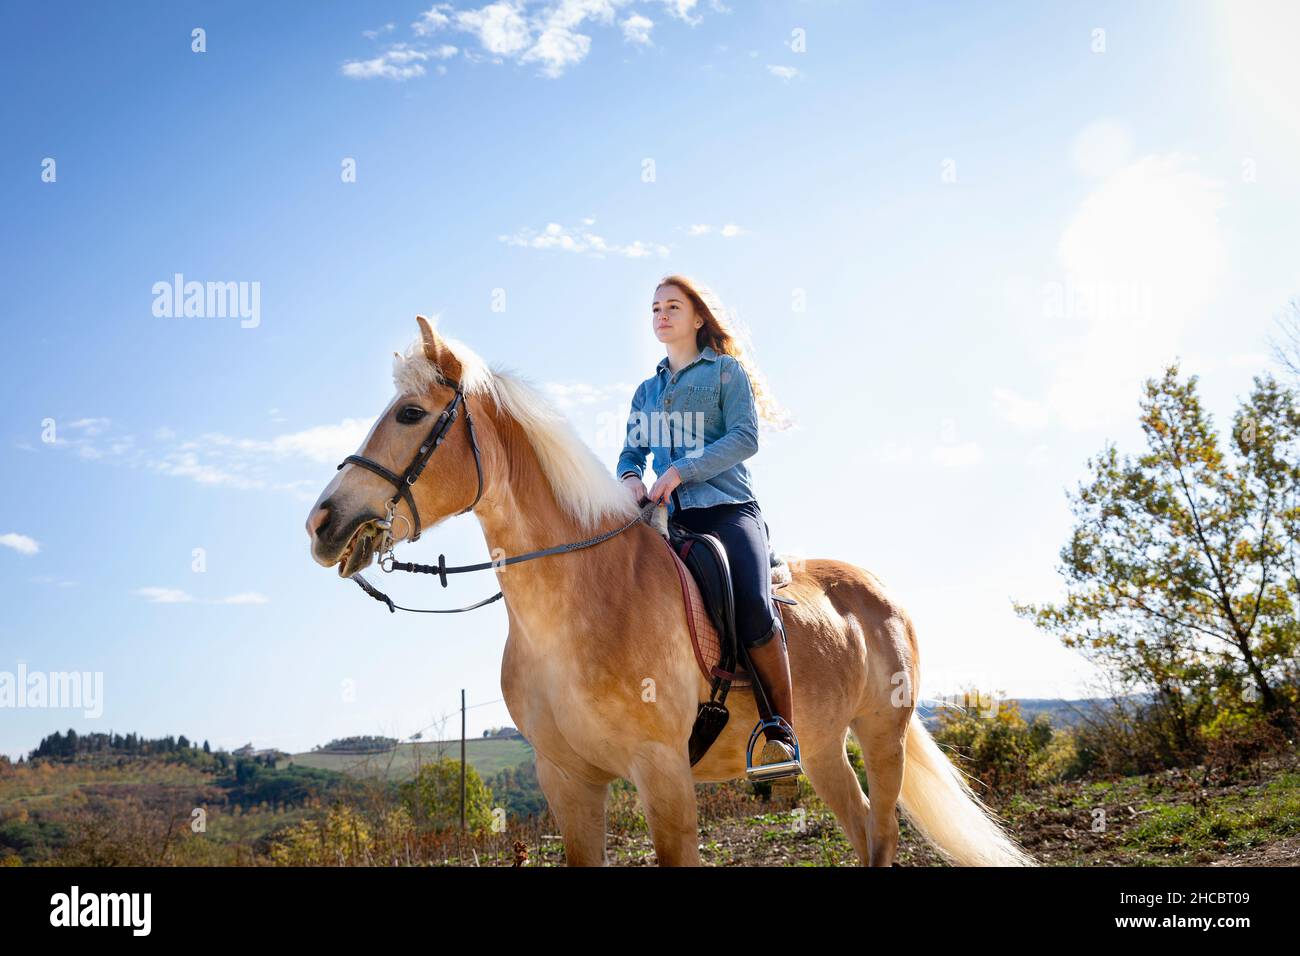 Woman horseback riding in front of sky on sunny day Stock Photo